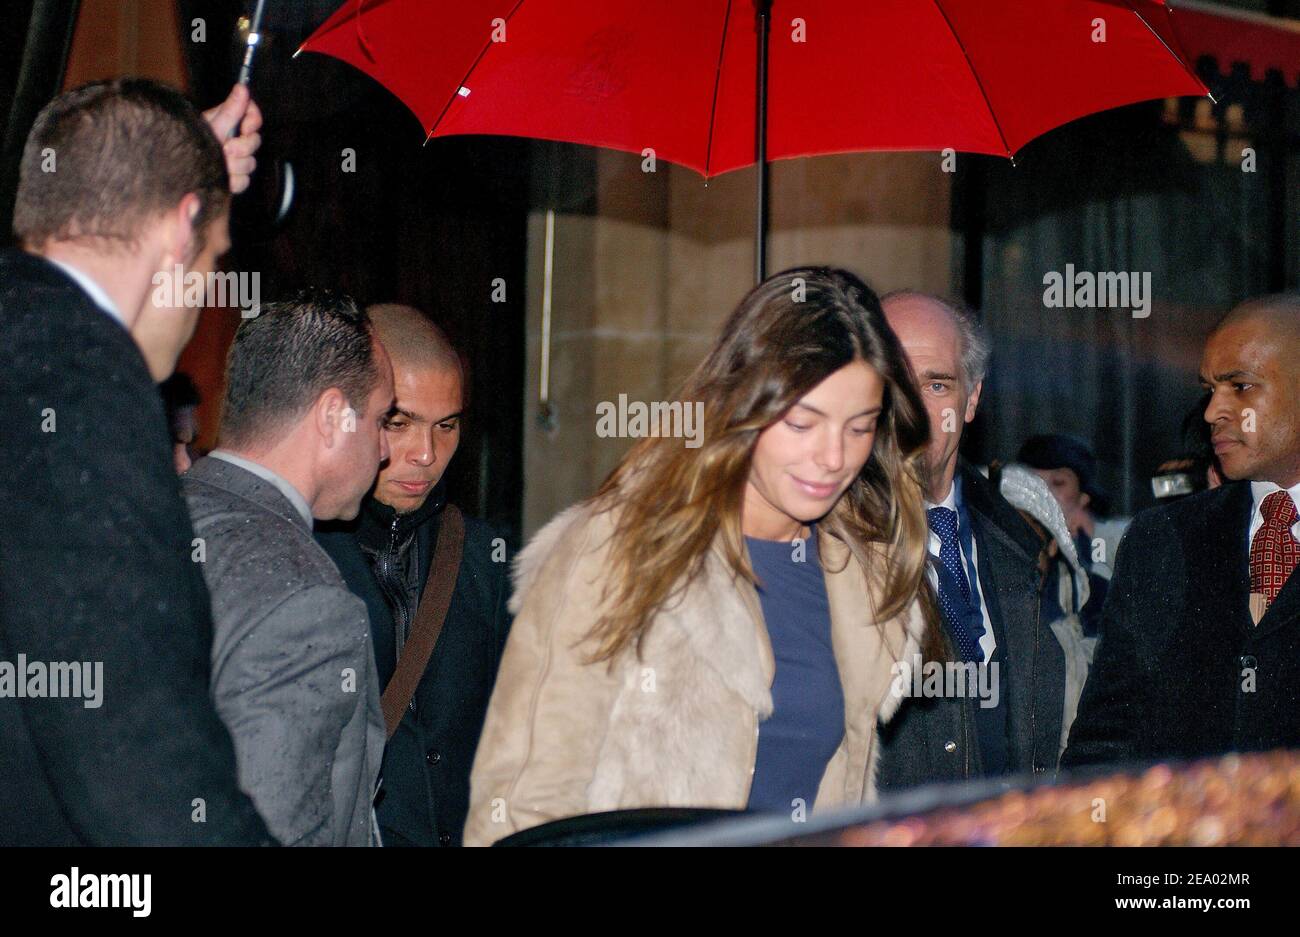 Brazilian football player Ronaldo set to marry Brazilian model Daniela Cicarelli at the Chateau de Chantilly in France on February 14, 2005. They leave Plaza Athenee hotel in Paris, France to go at Chateau de Chantilly for the evening party. Photo by Gorassini-Hounsfield-Klein-Mousse-Zabulon/ABACA. Stock Photo